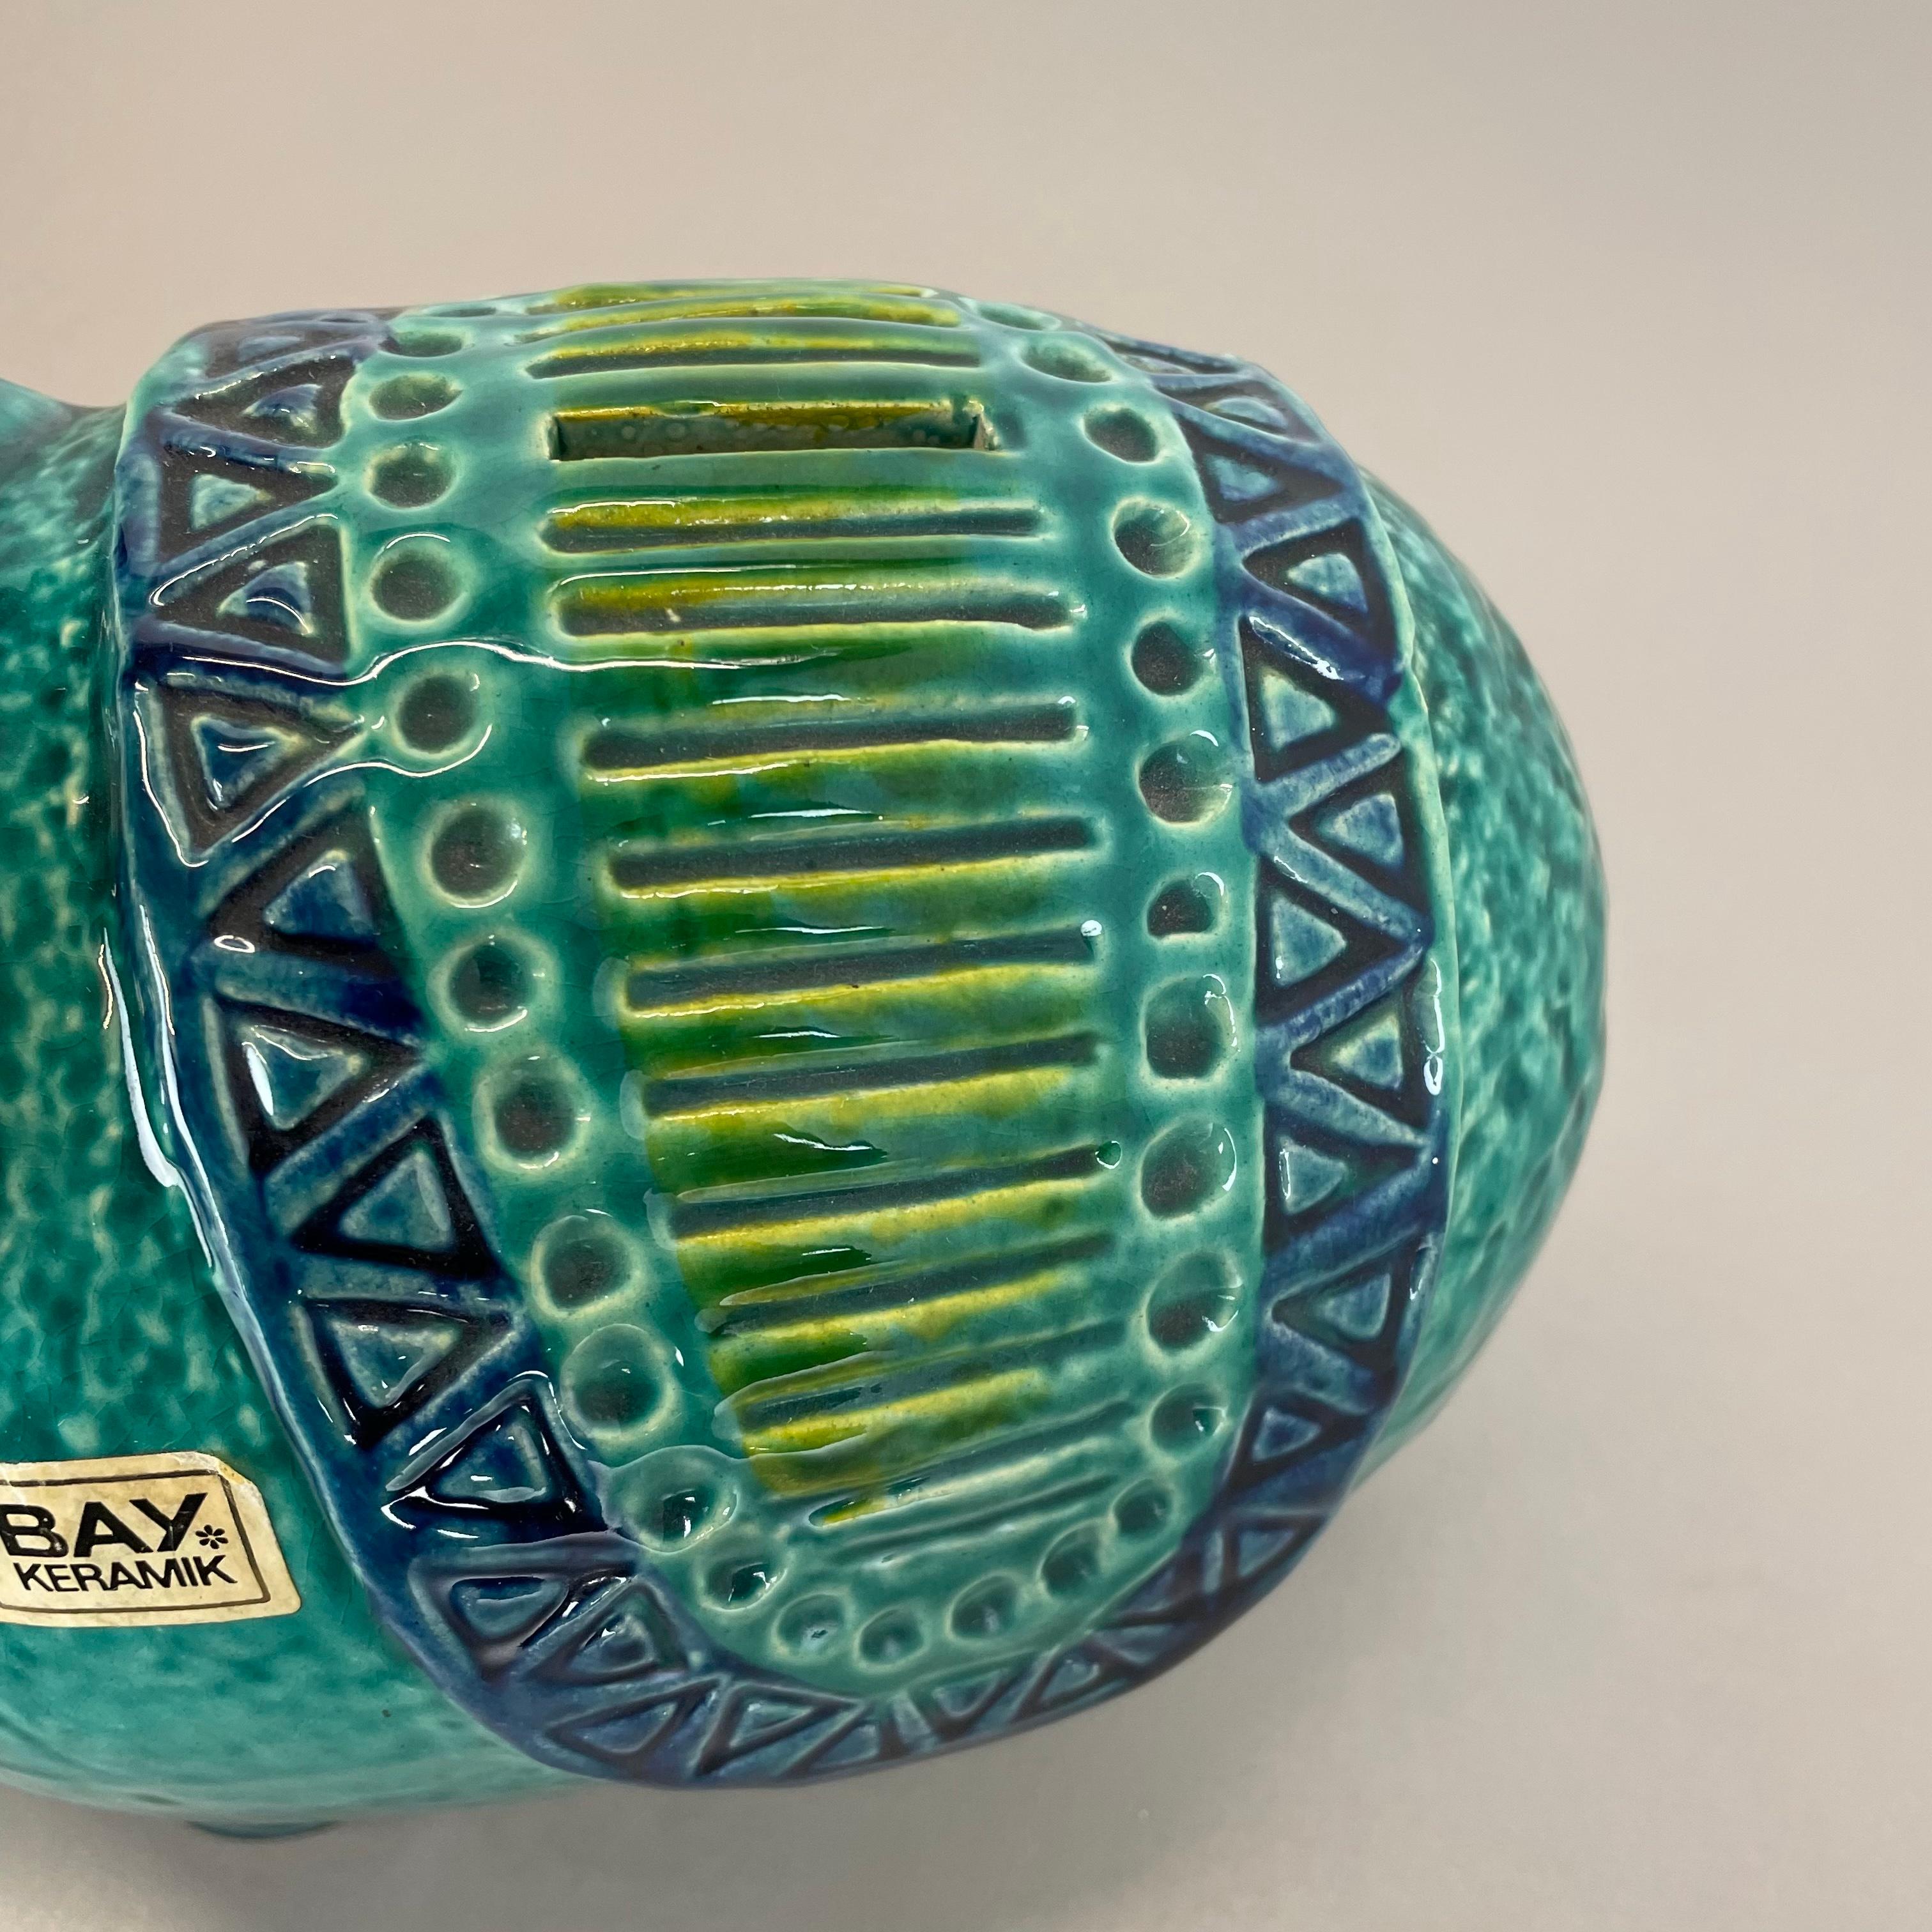 Colorful Fat Lava Pottery Swine Money Box Object by Bay Ceramics, Germany, 1970s For Sale 3